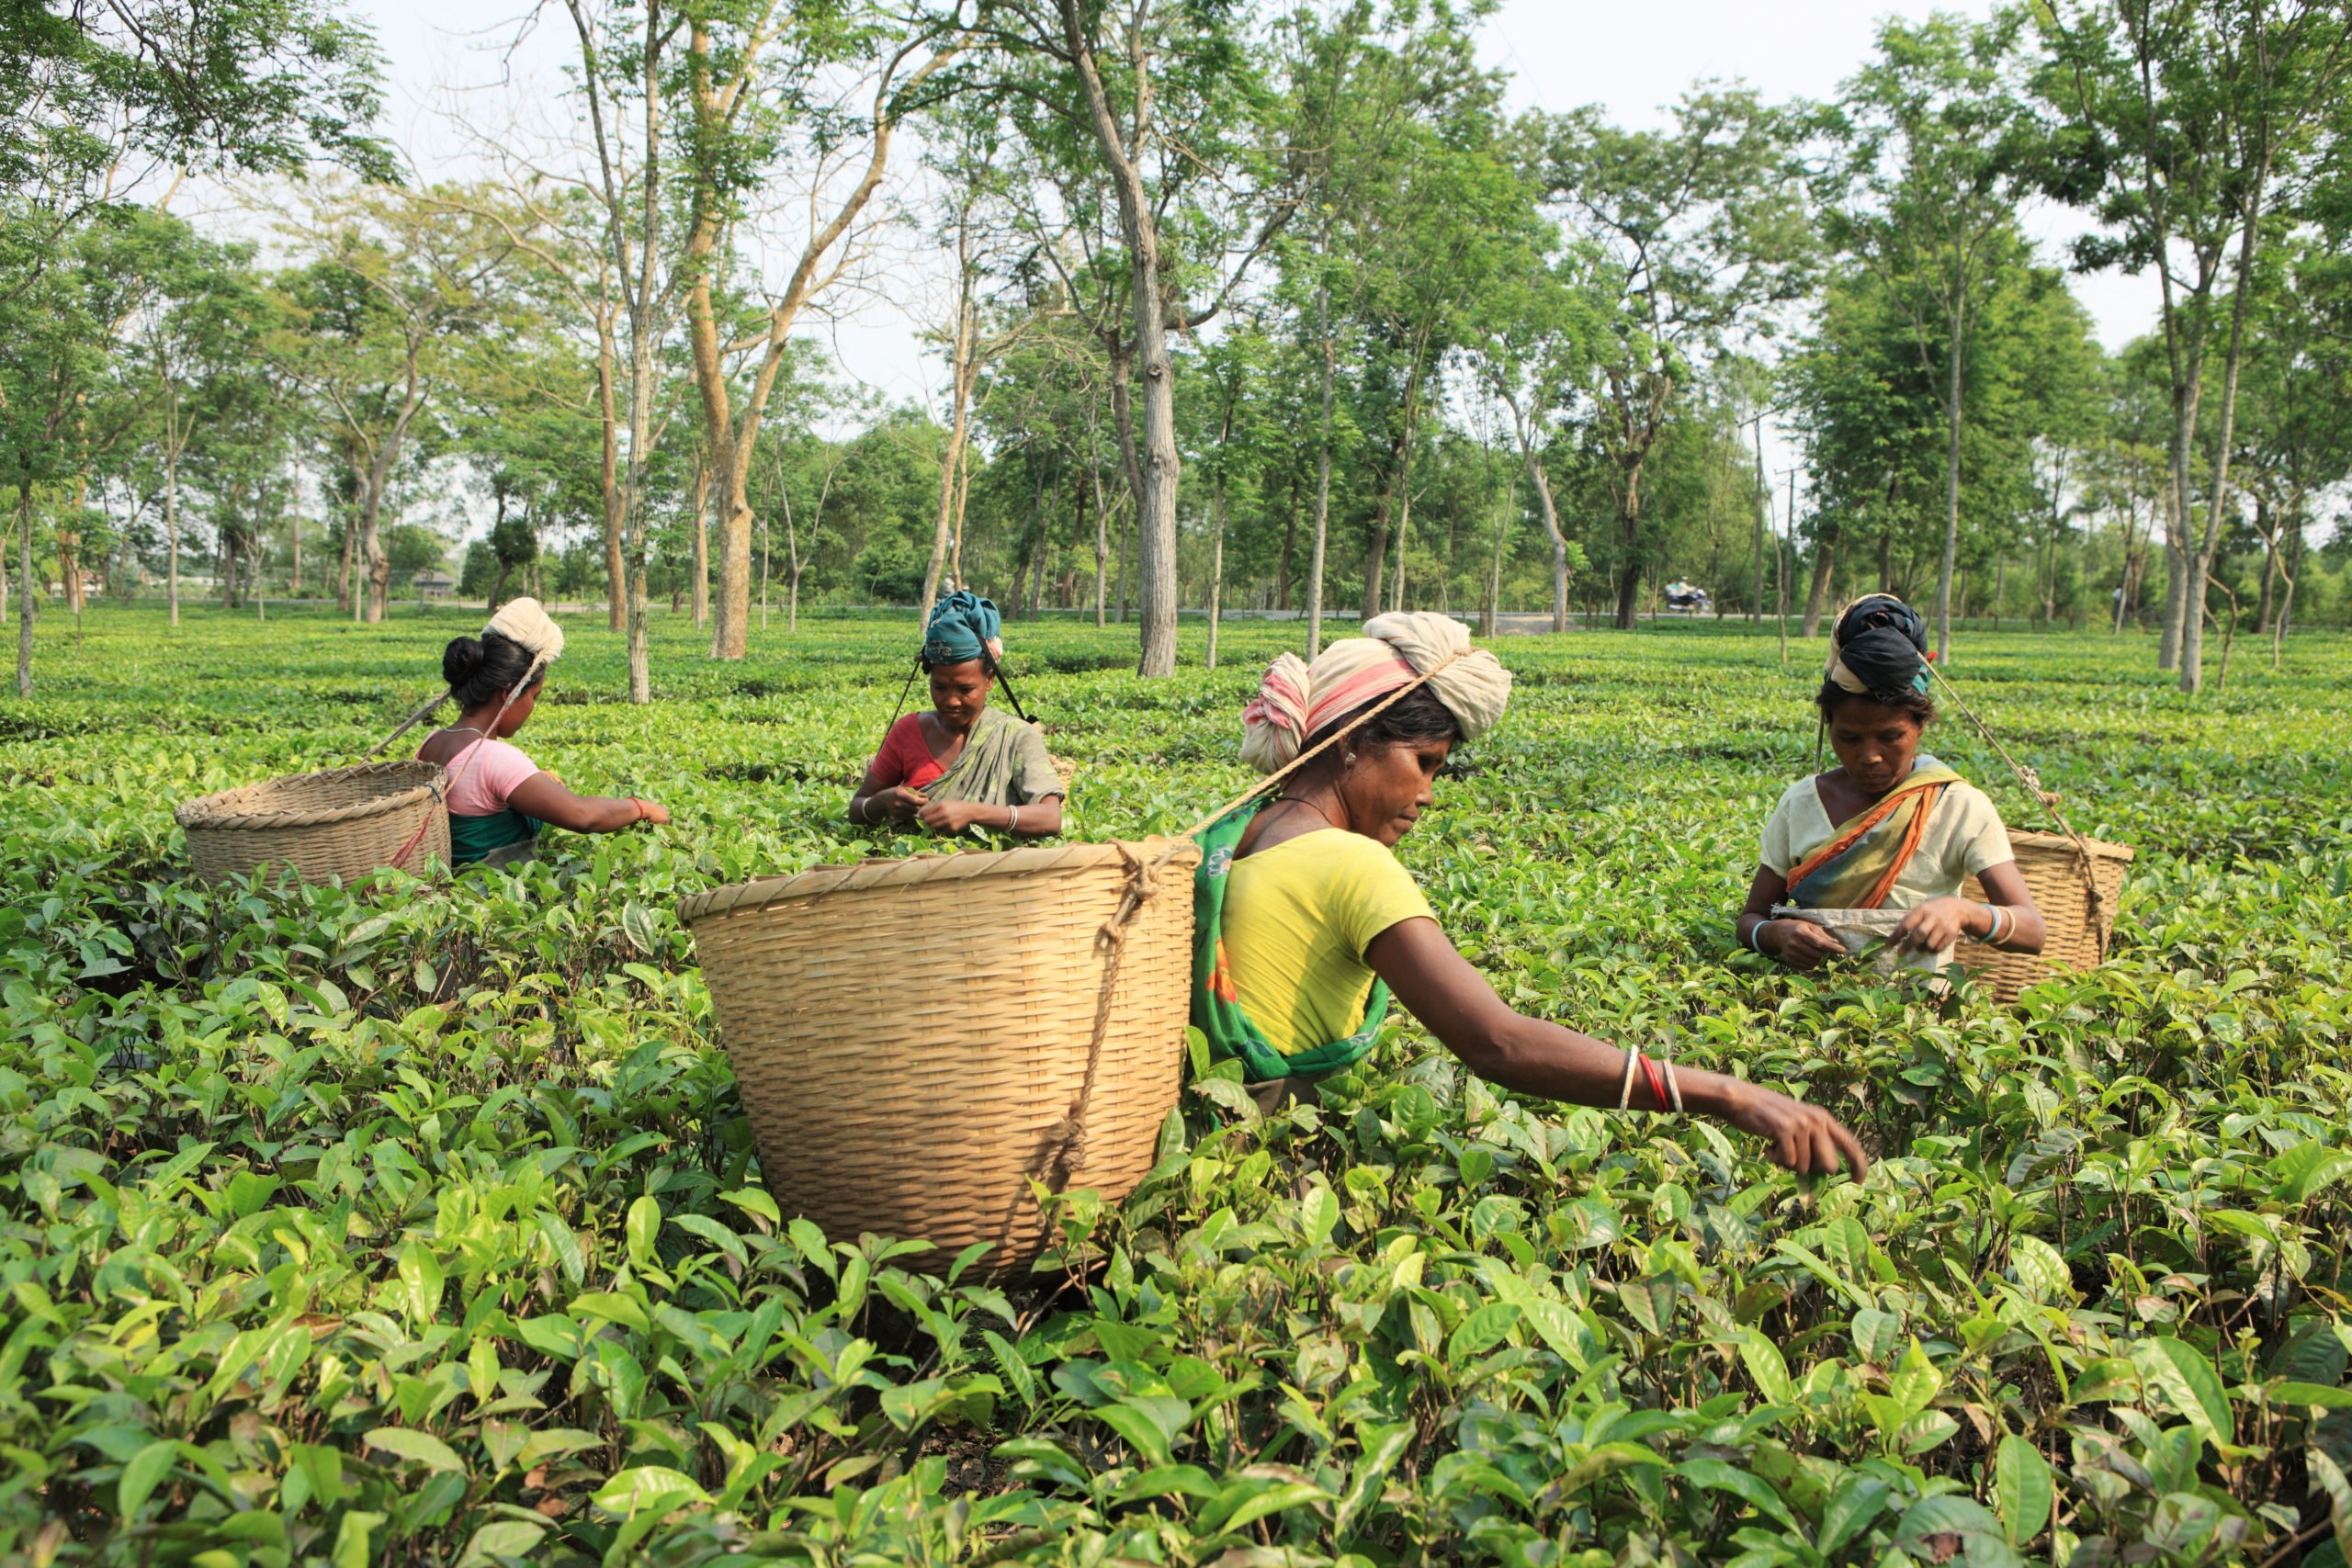 <p>Workers pick tea leaves on a plantation in Assam. The tea garden community is one of the state’s most marginalised and vulnerable groups (Image: Dinodia Photos / Alamy)</p>